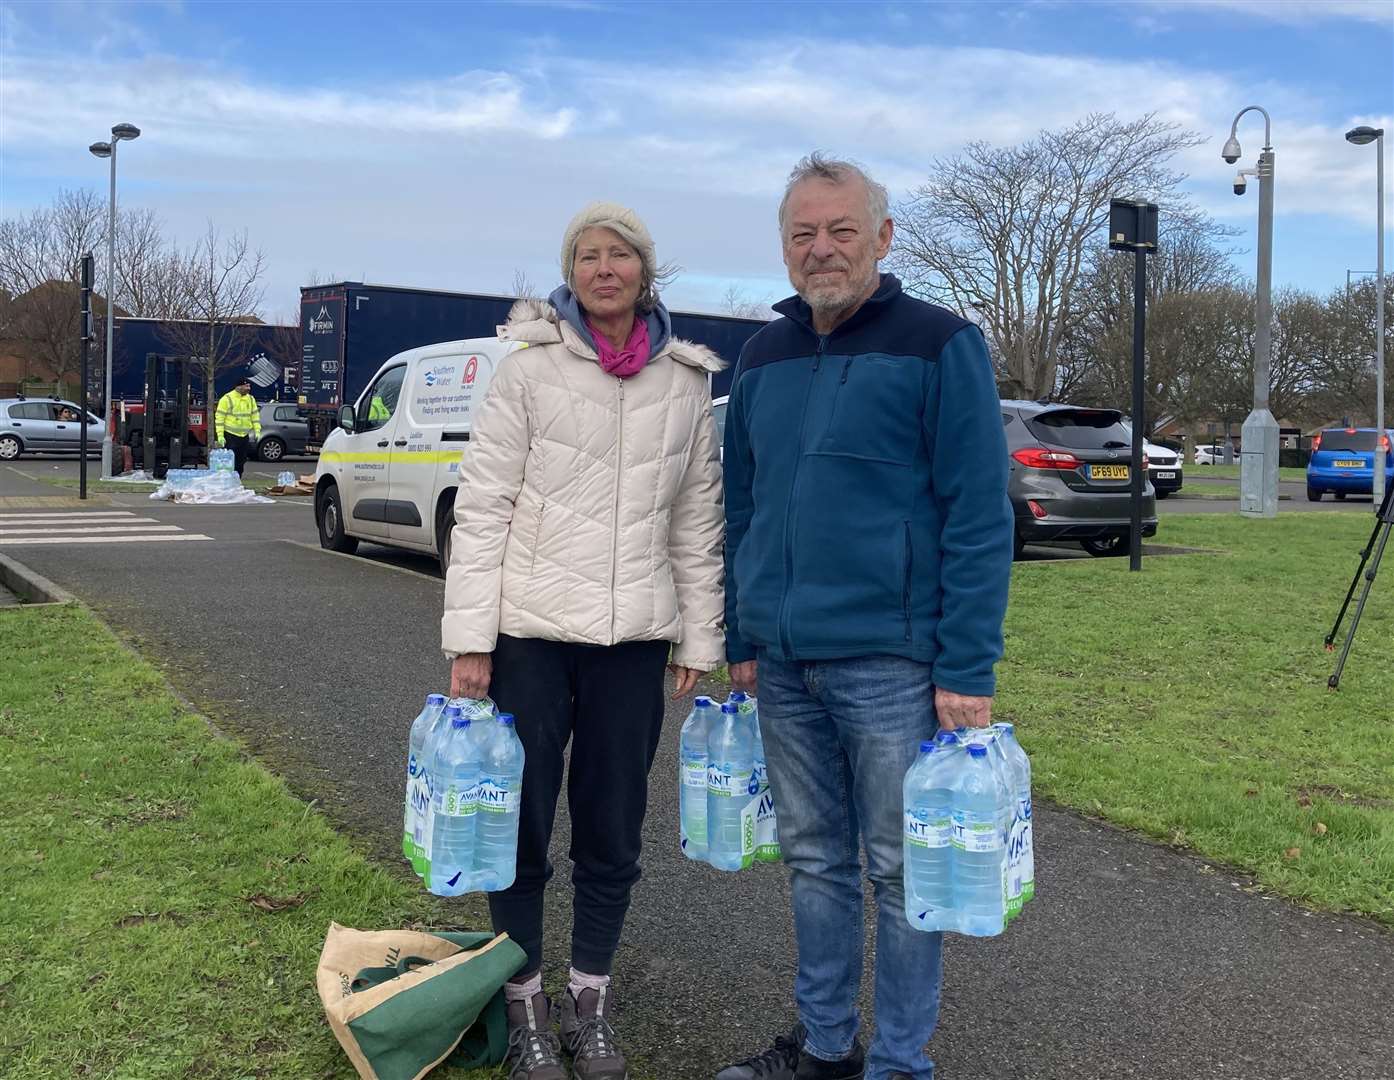 Barbara Luton, who lives in St Peter’s, and John Blackgrove, from Broadstairs, collecting bottled water from Dane Court Grammar School in Broadstairs